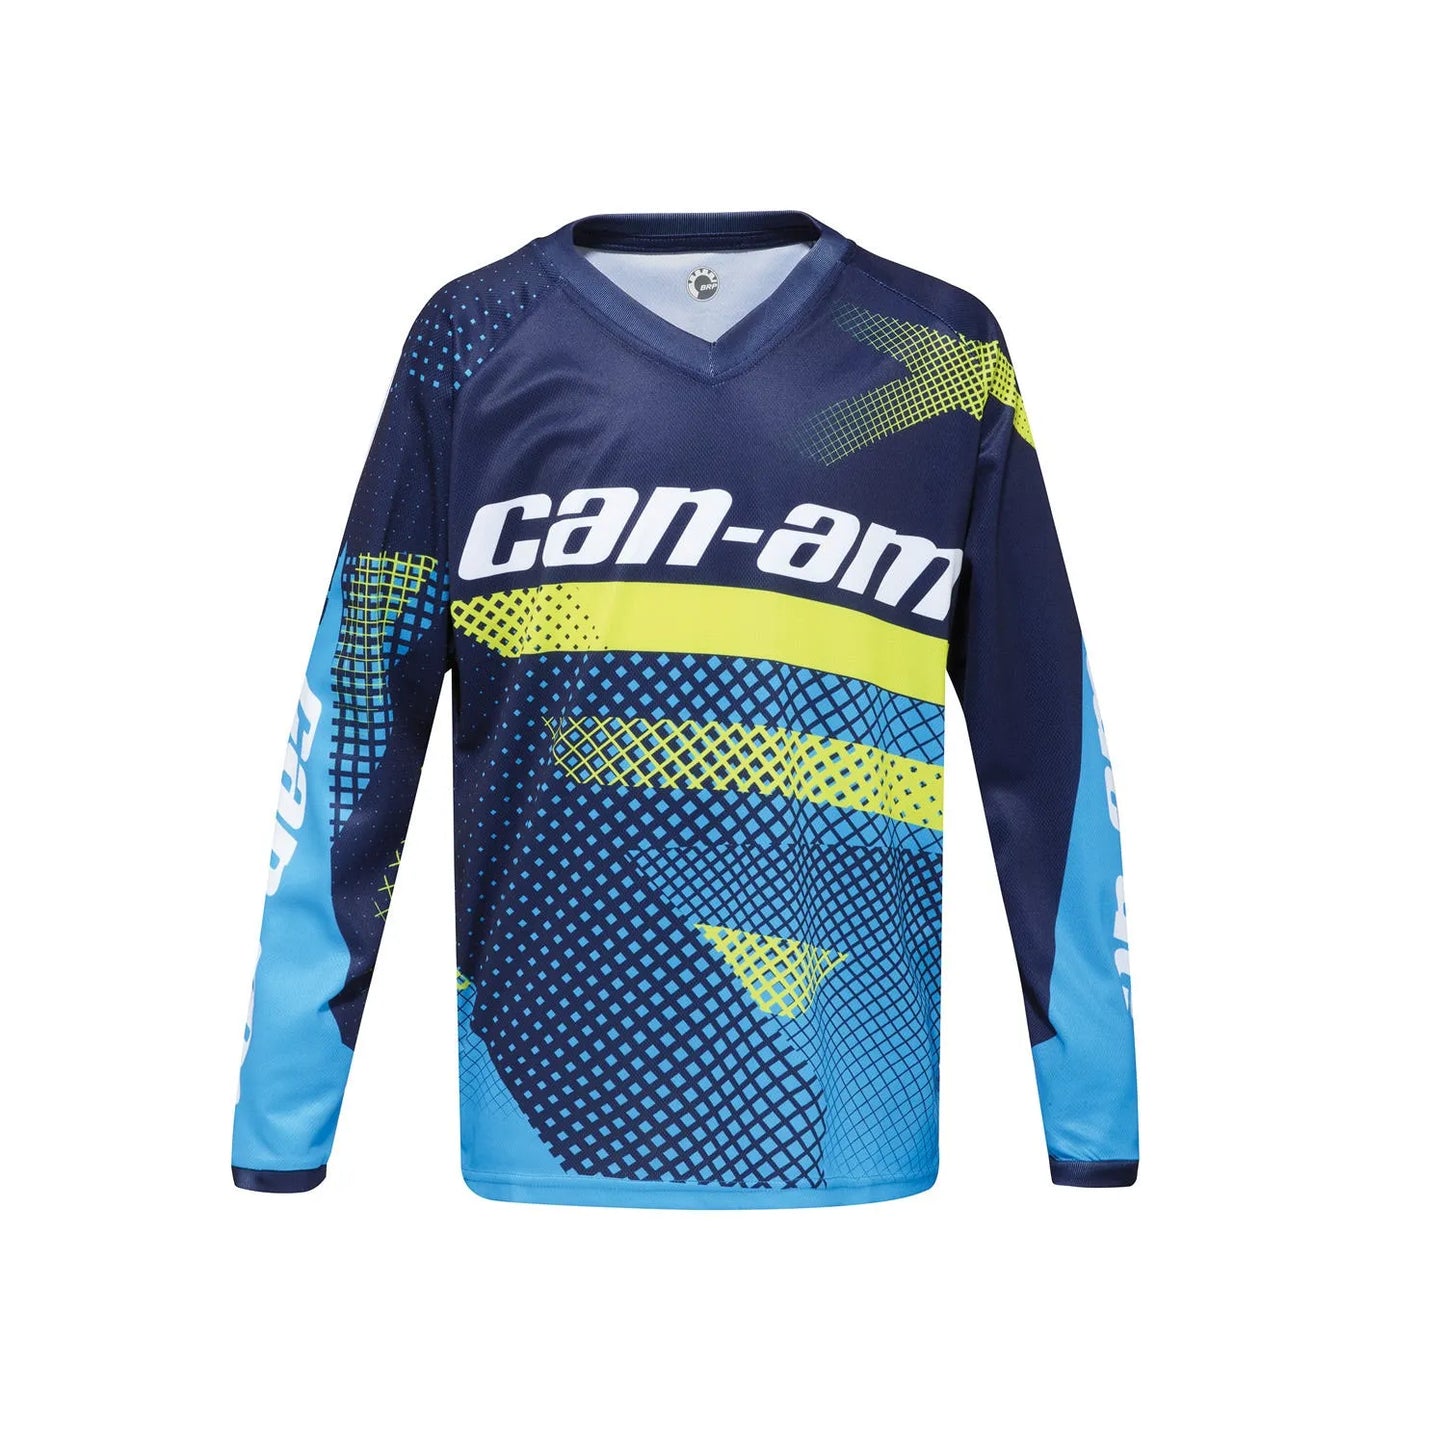 CAN-AM YOUTH X FACTOR JERSEY